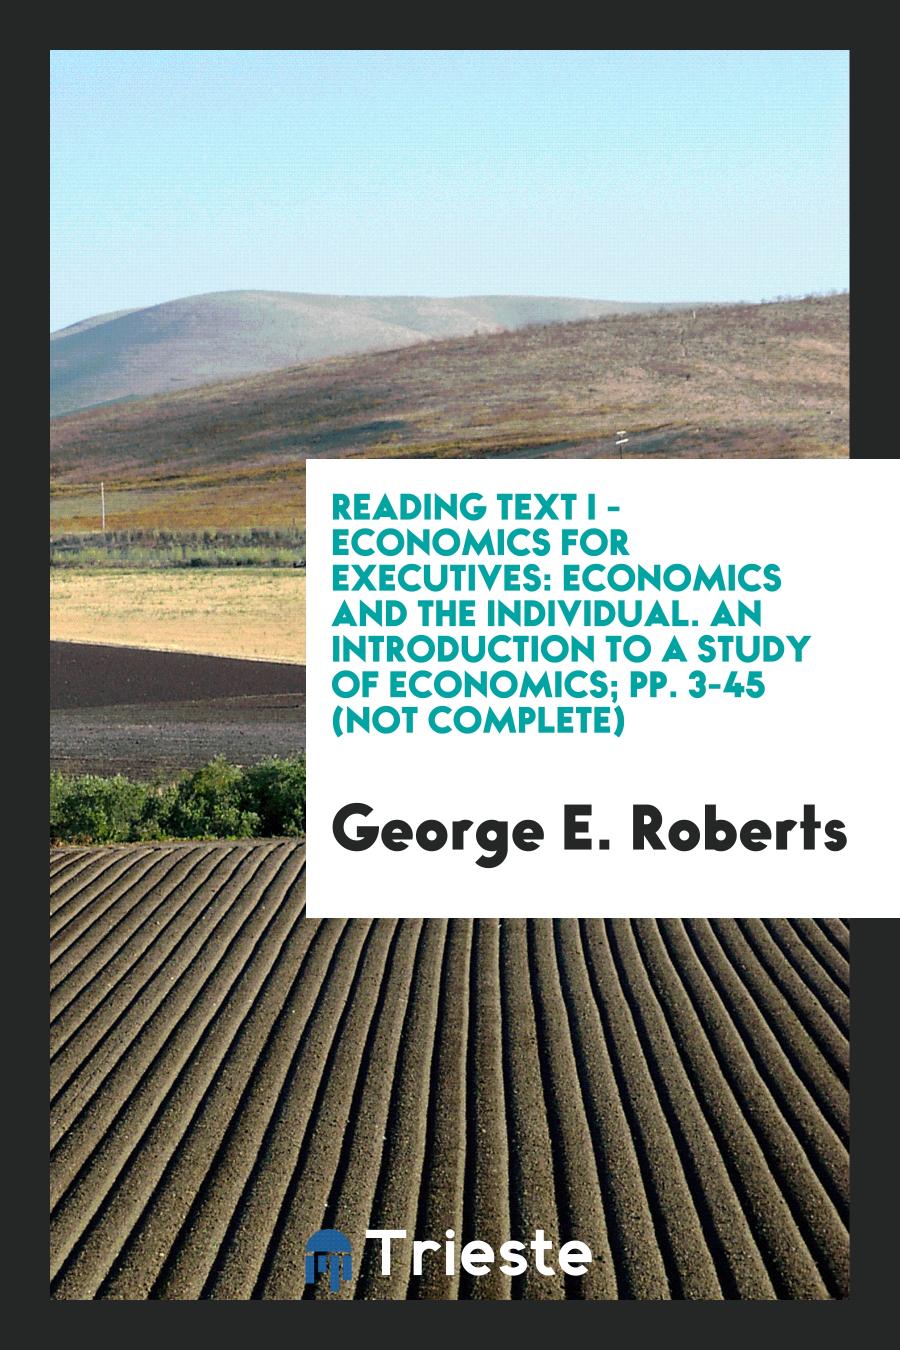 Reading text I - Economics for Executives: Economics and the individual. An Introduction to a Study of Economics; pp. 3-45 (not complete)